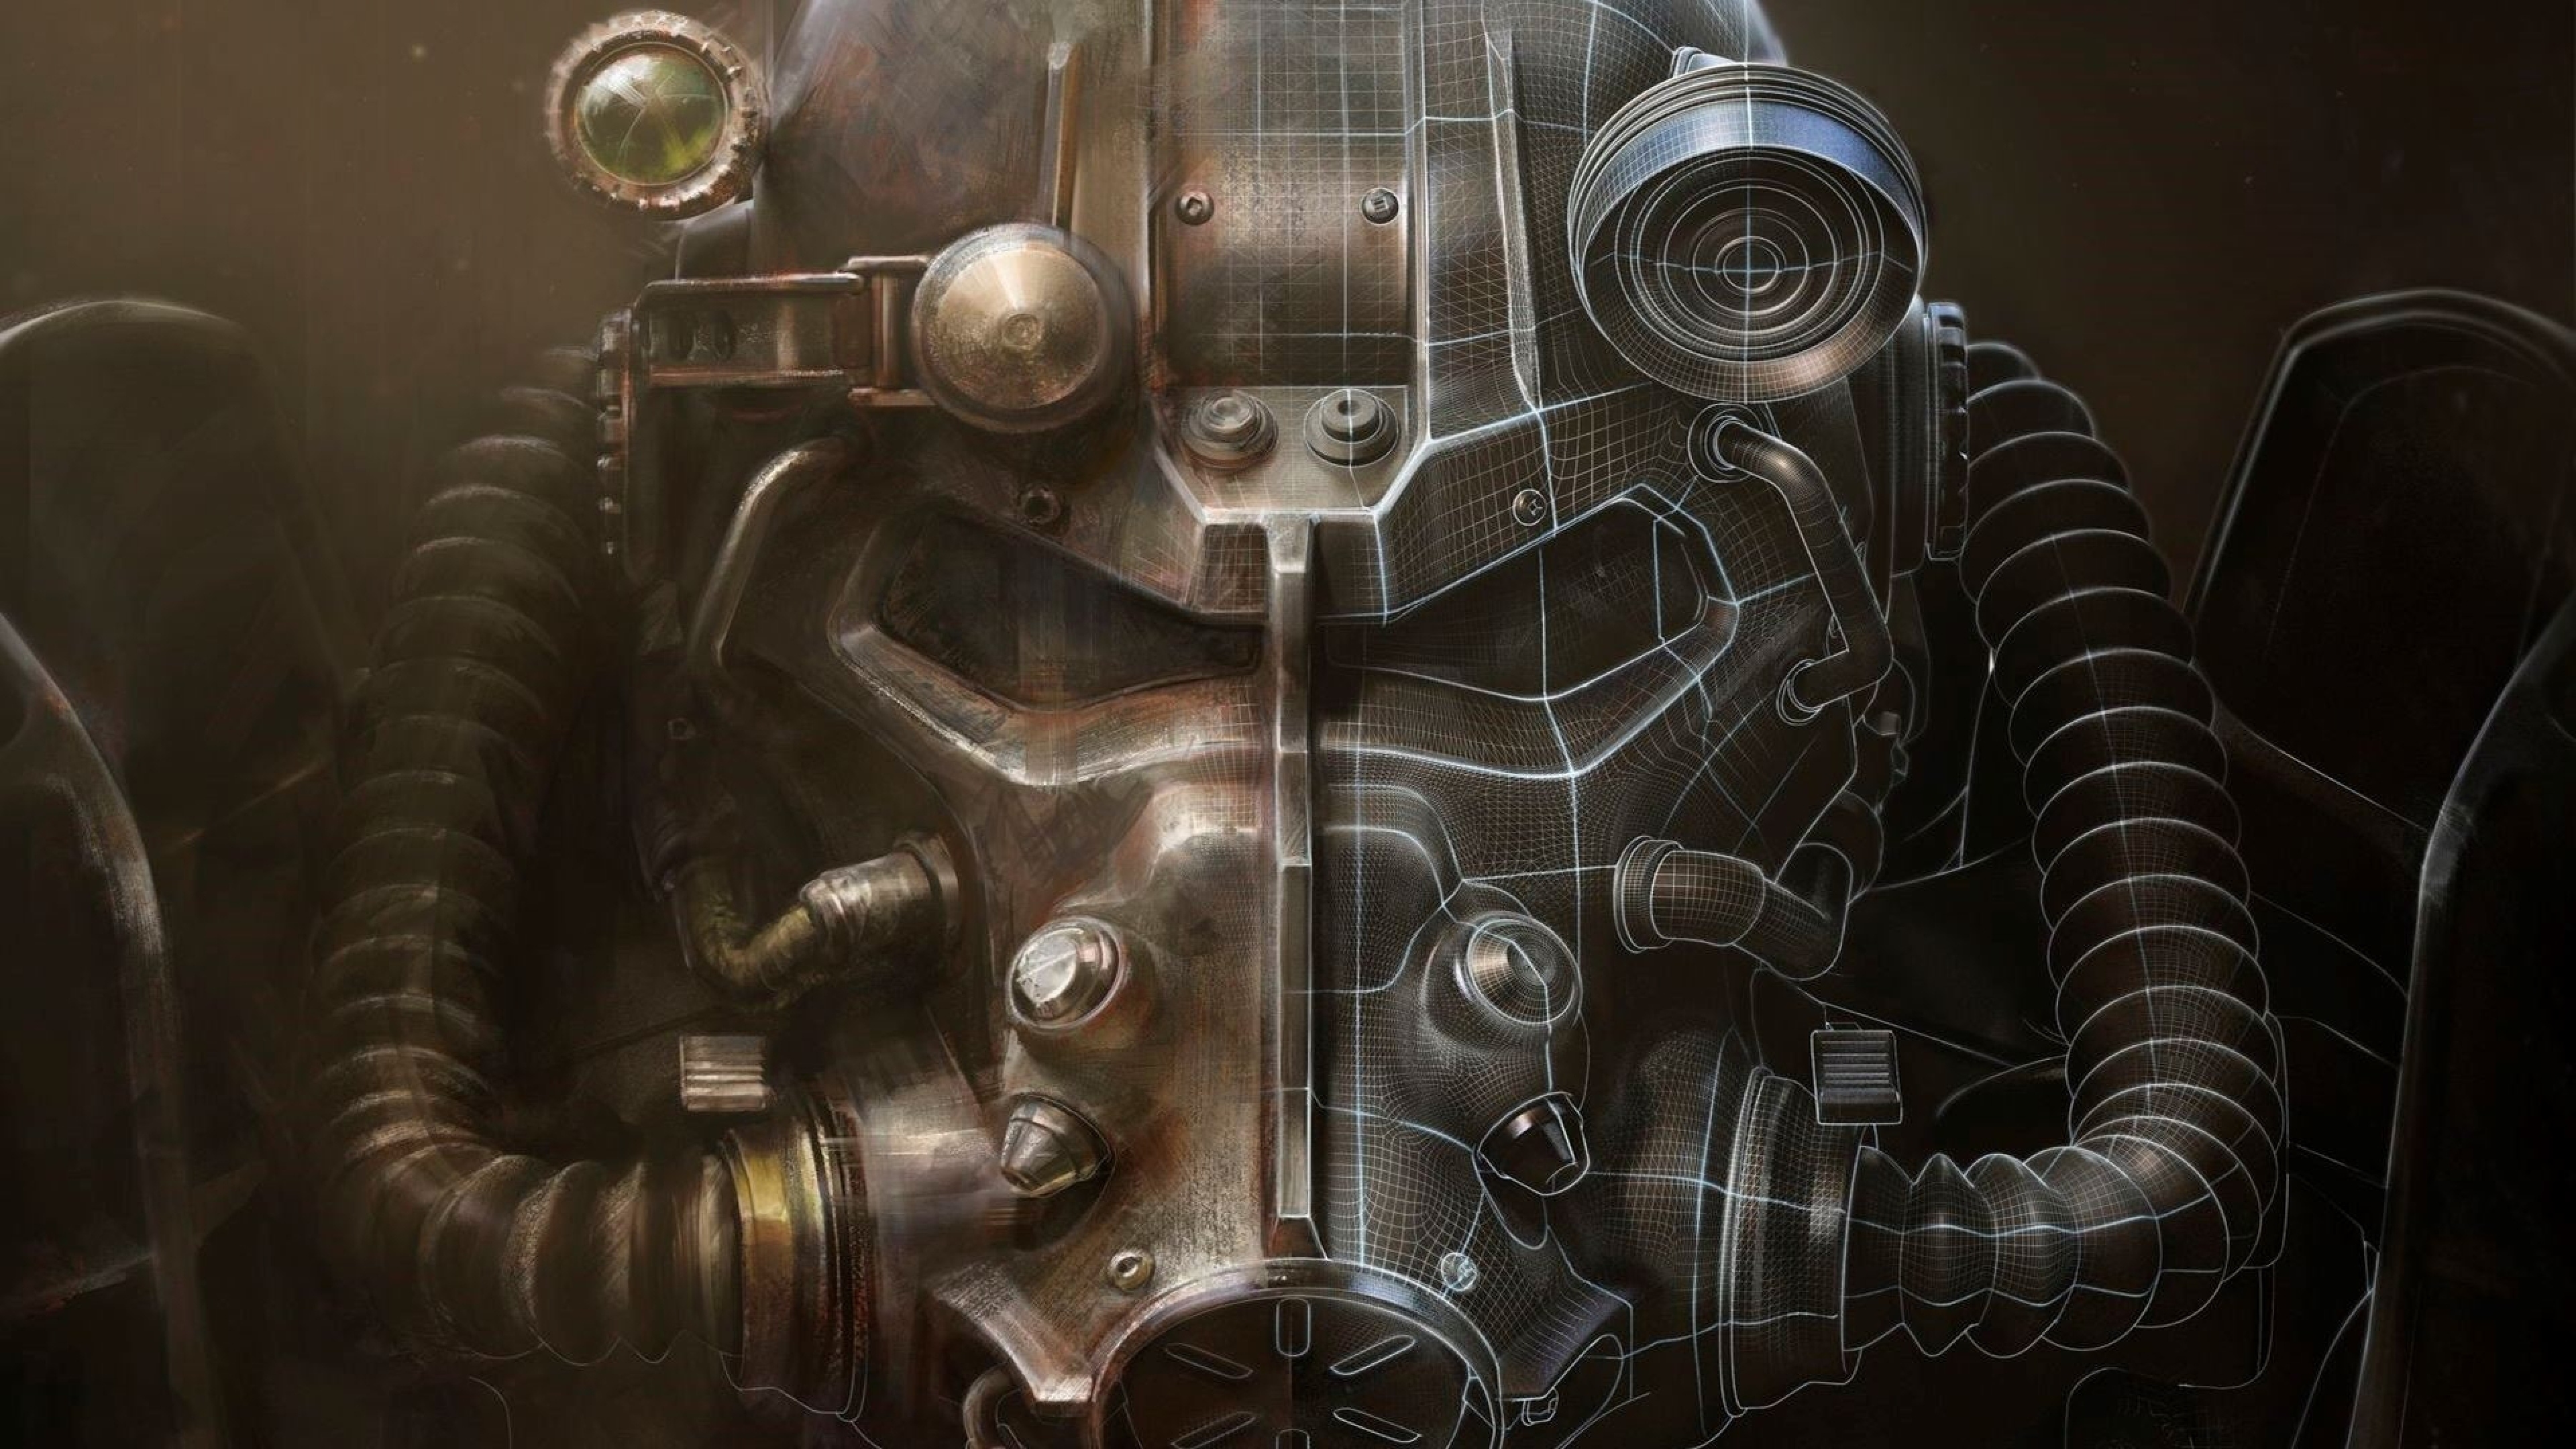 Fallout Bethesda Softworks Armor Wallpaper Background 4k Ultra HD